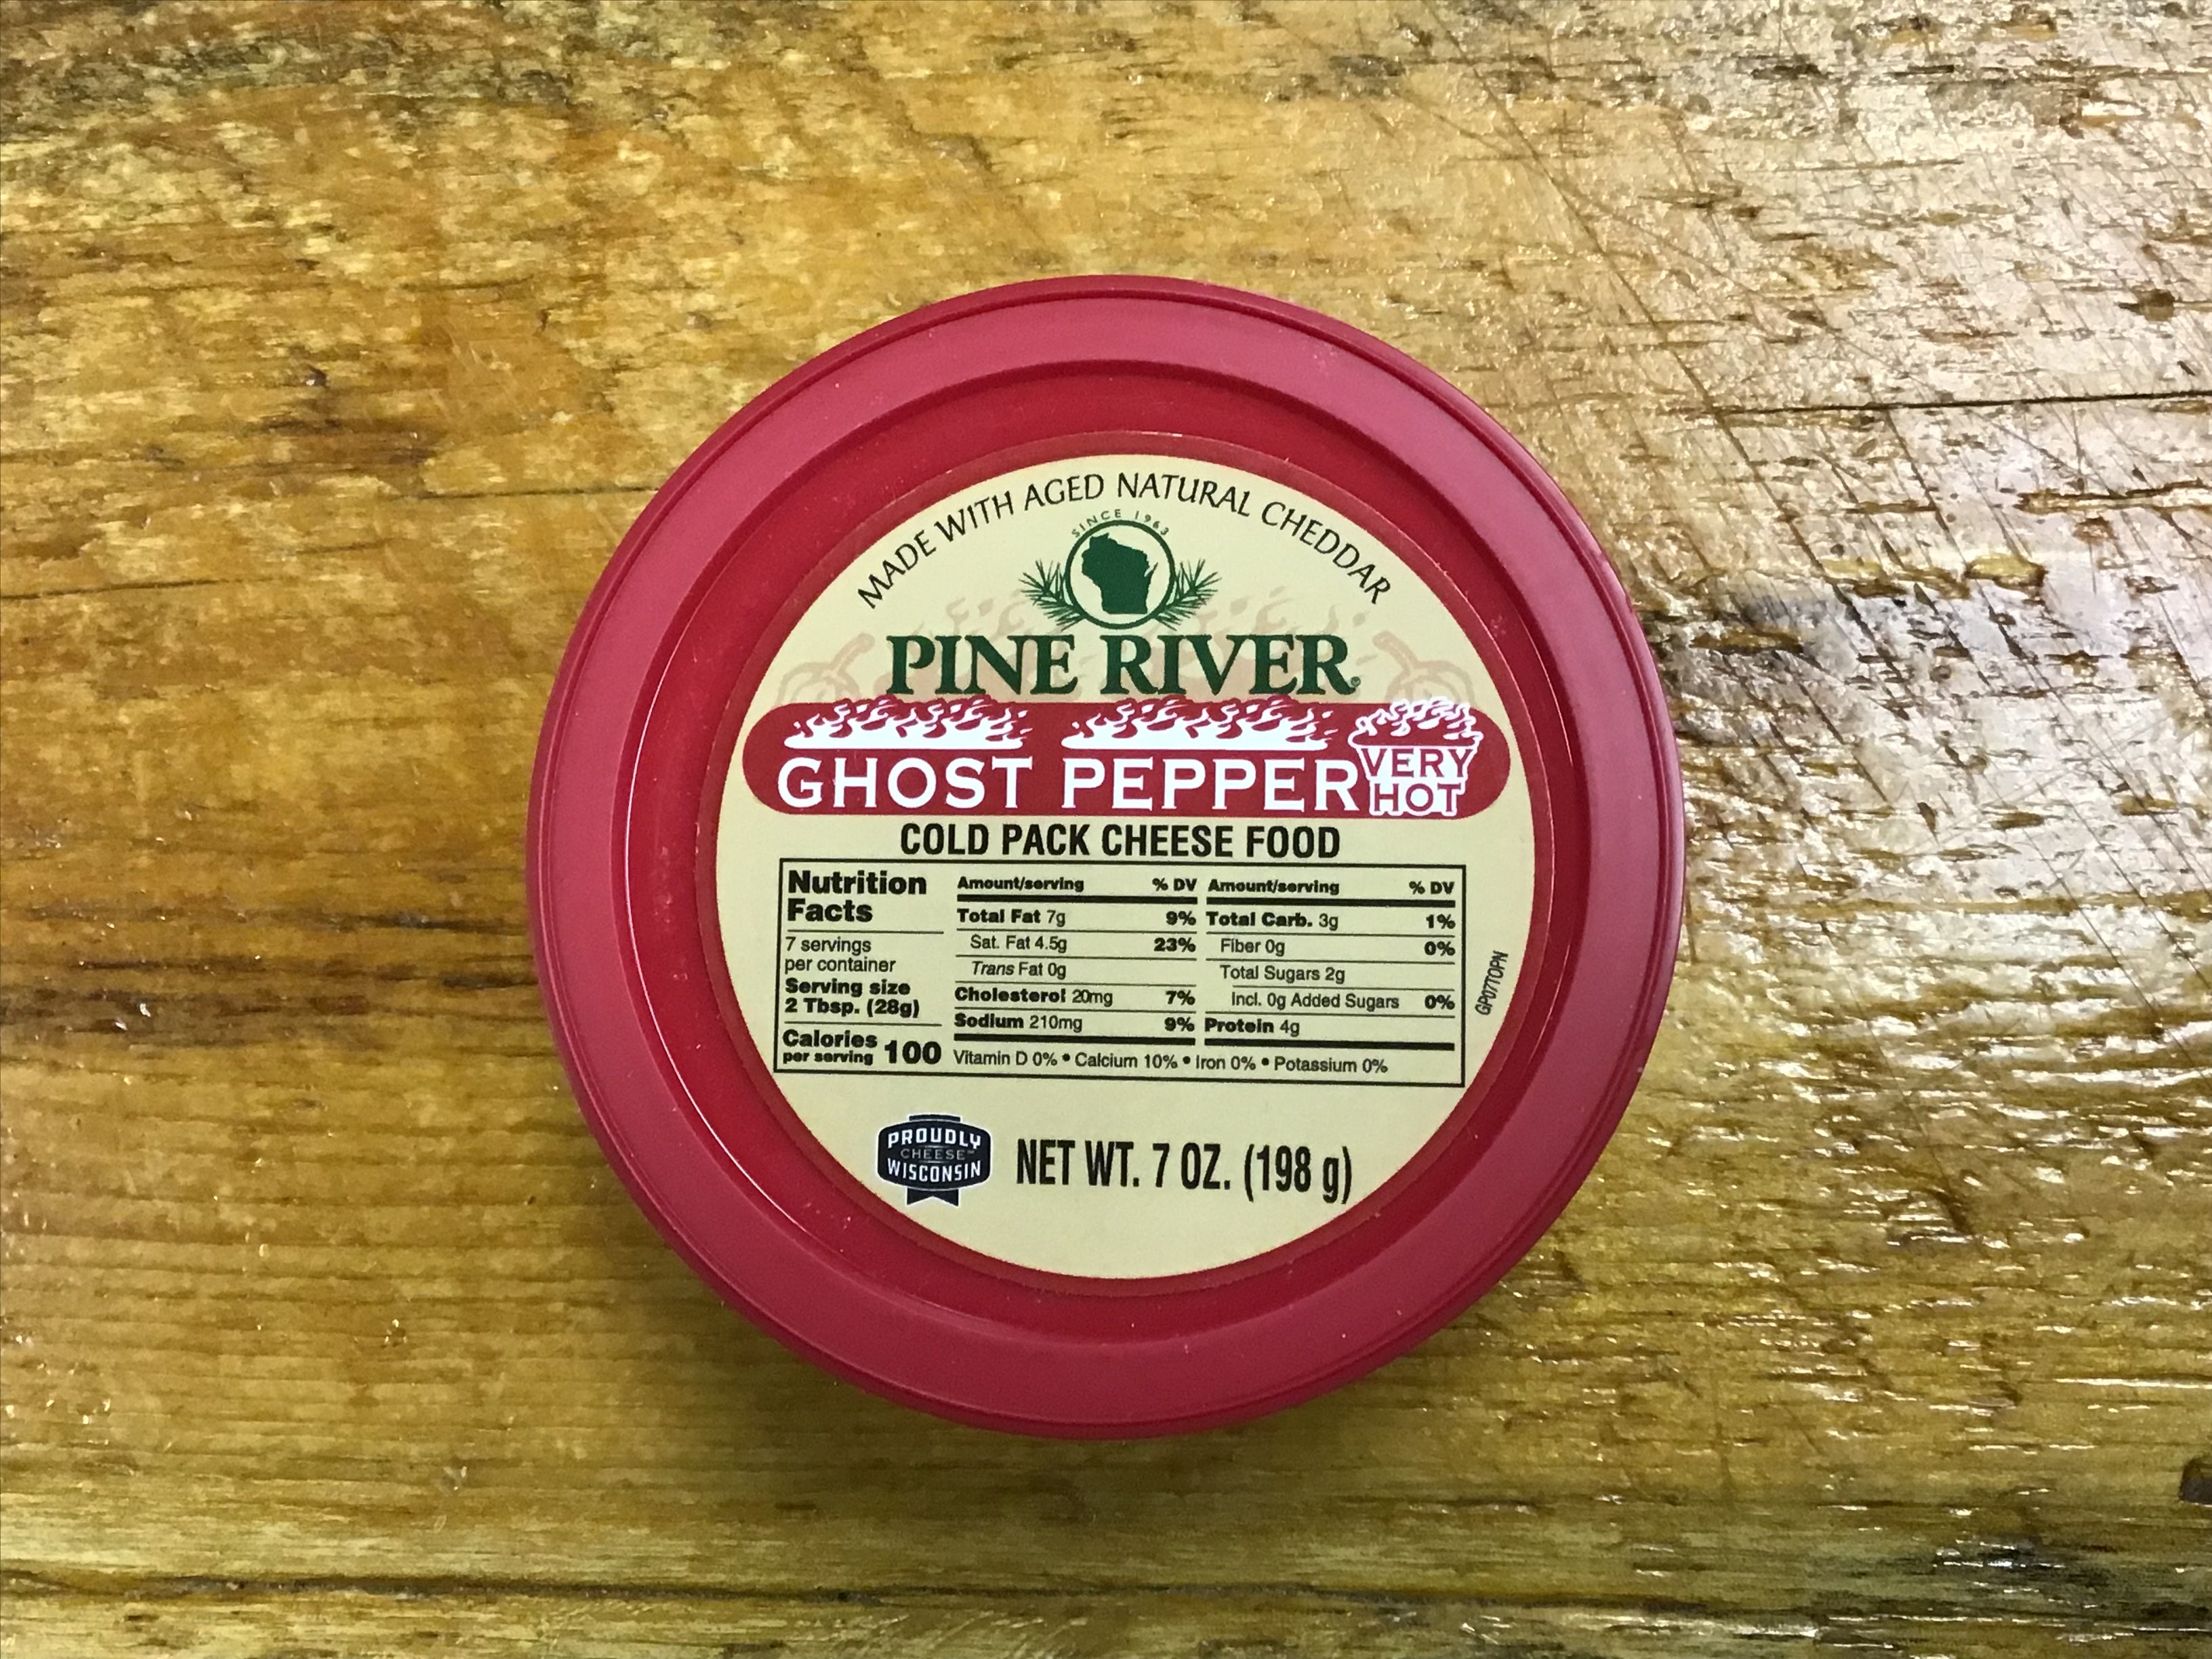 Ghost Pepper VERY HOT - Pine River